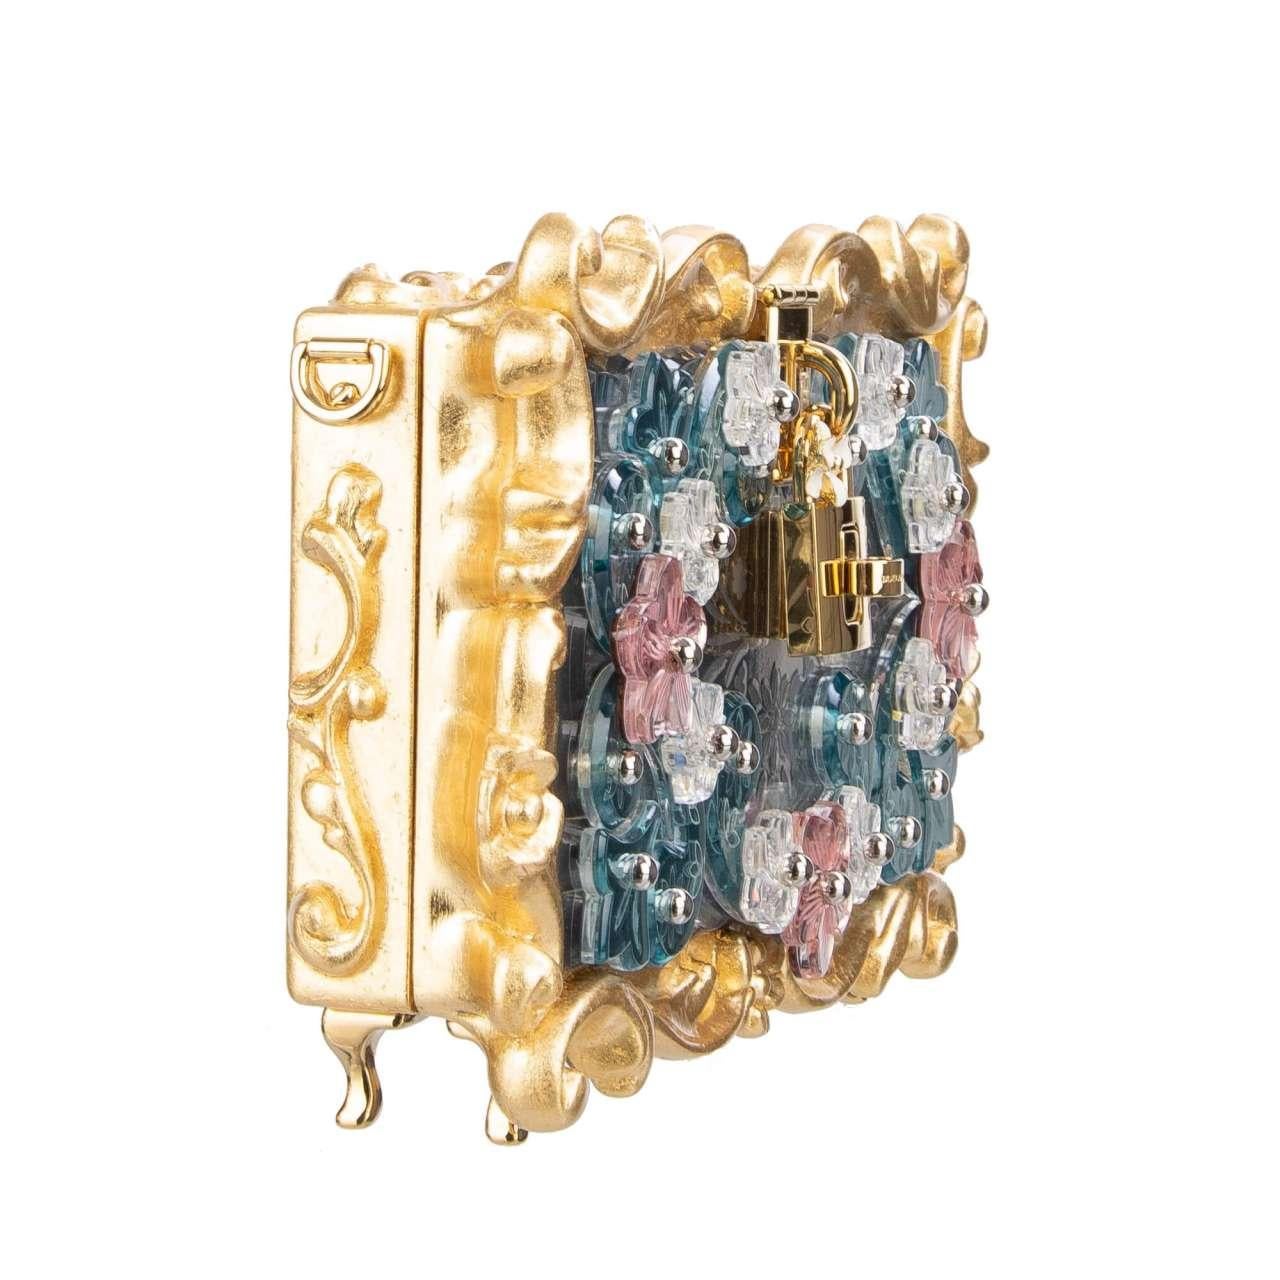 - Crystal flowers and mirror embellished plexiglas and wood Baroque bag / shoulder bag / clutch DOLCE BOX with decorative padlock with flower in gold, blue and pink by DOLCE & GABBANA - New with Tag, Dustbag, Authenticity Card - Material: 60% Wood,